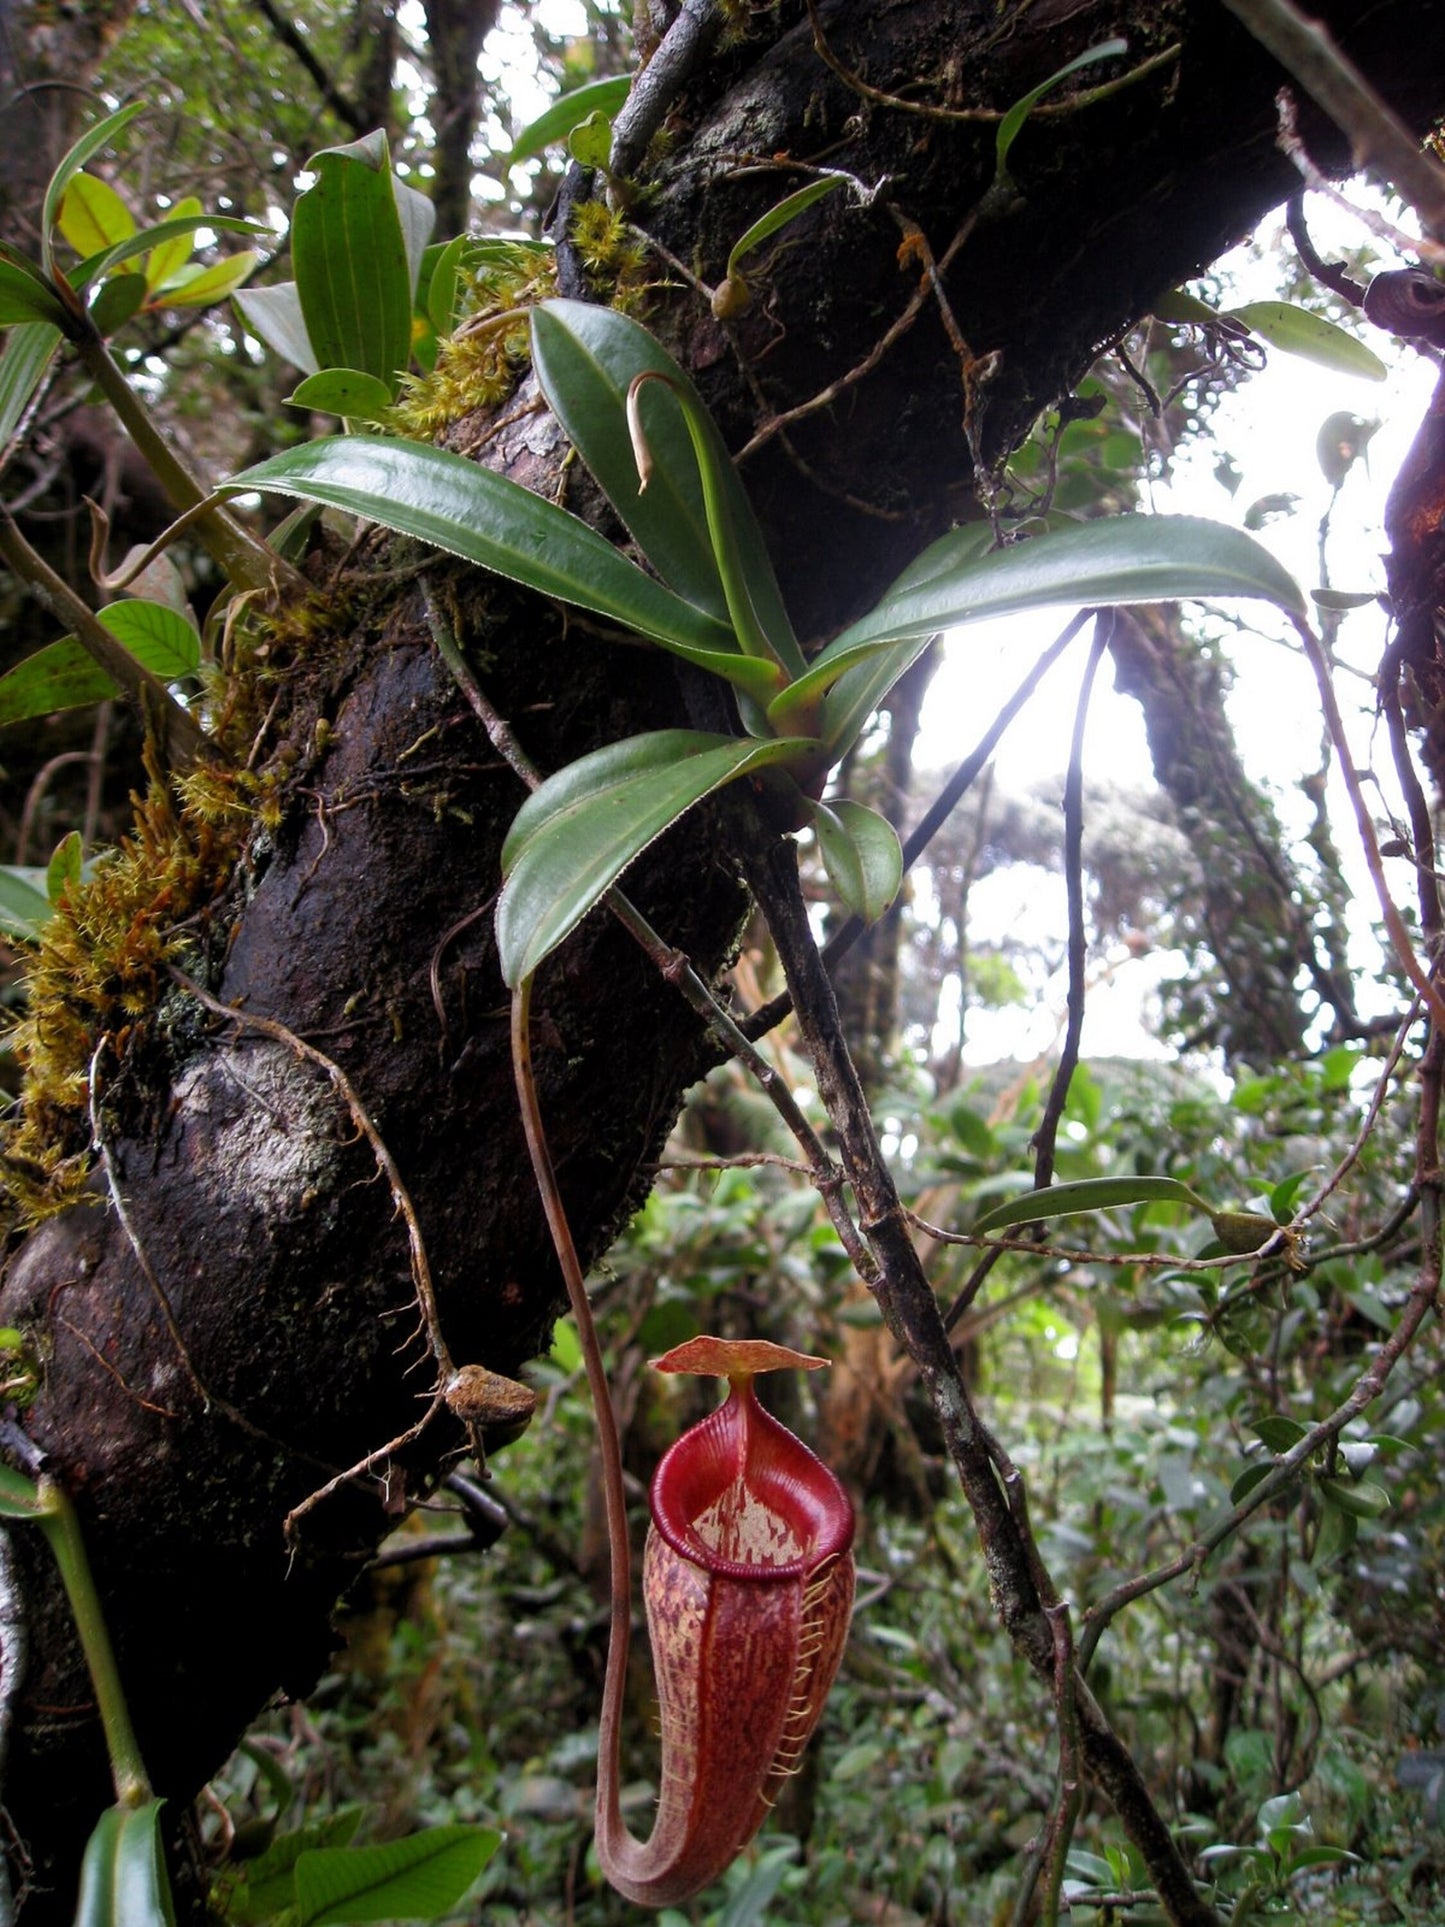 Nepenthes Talangensis x Spathulata * Highland Tropical Pitcher Plant * Rare * 5 Seeds *